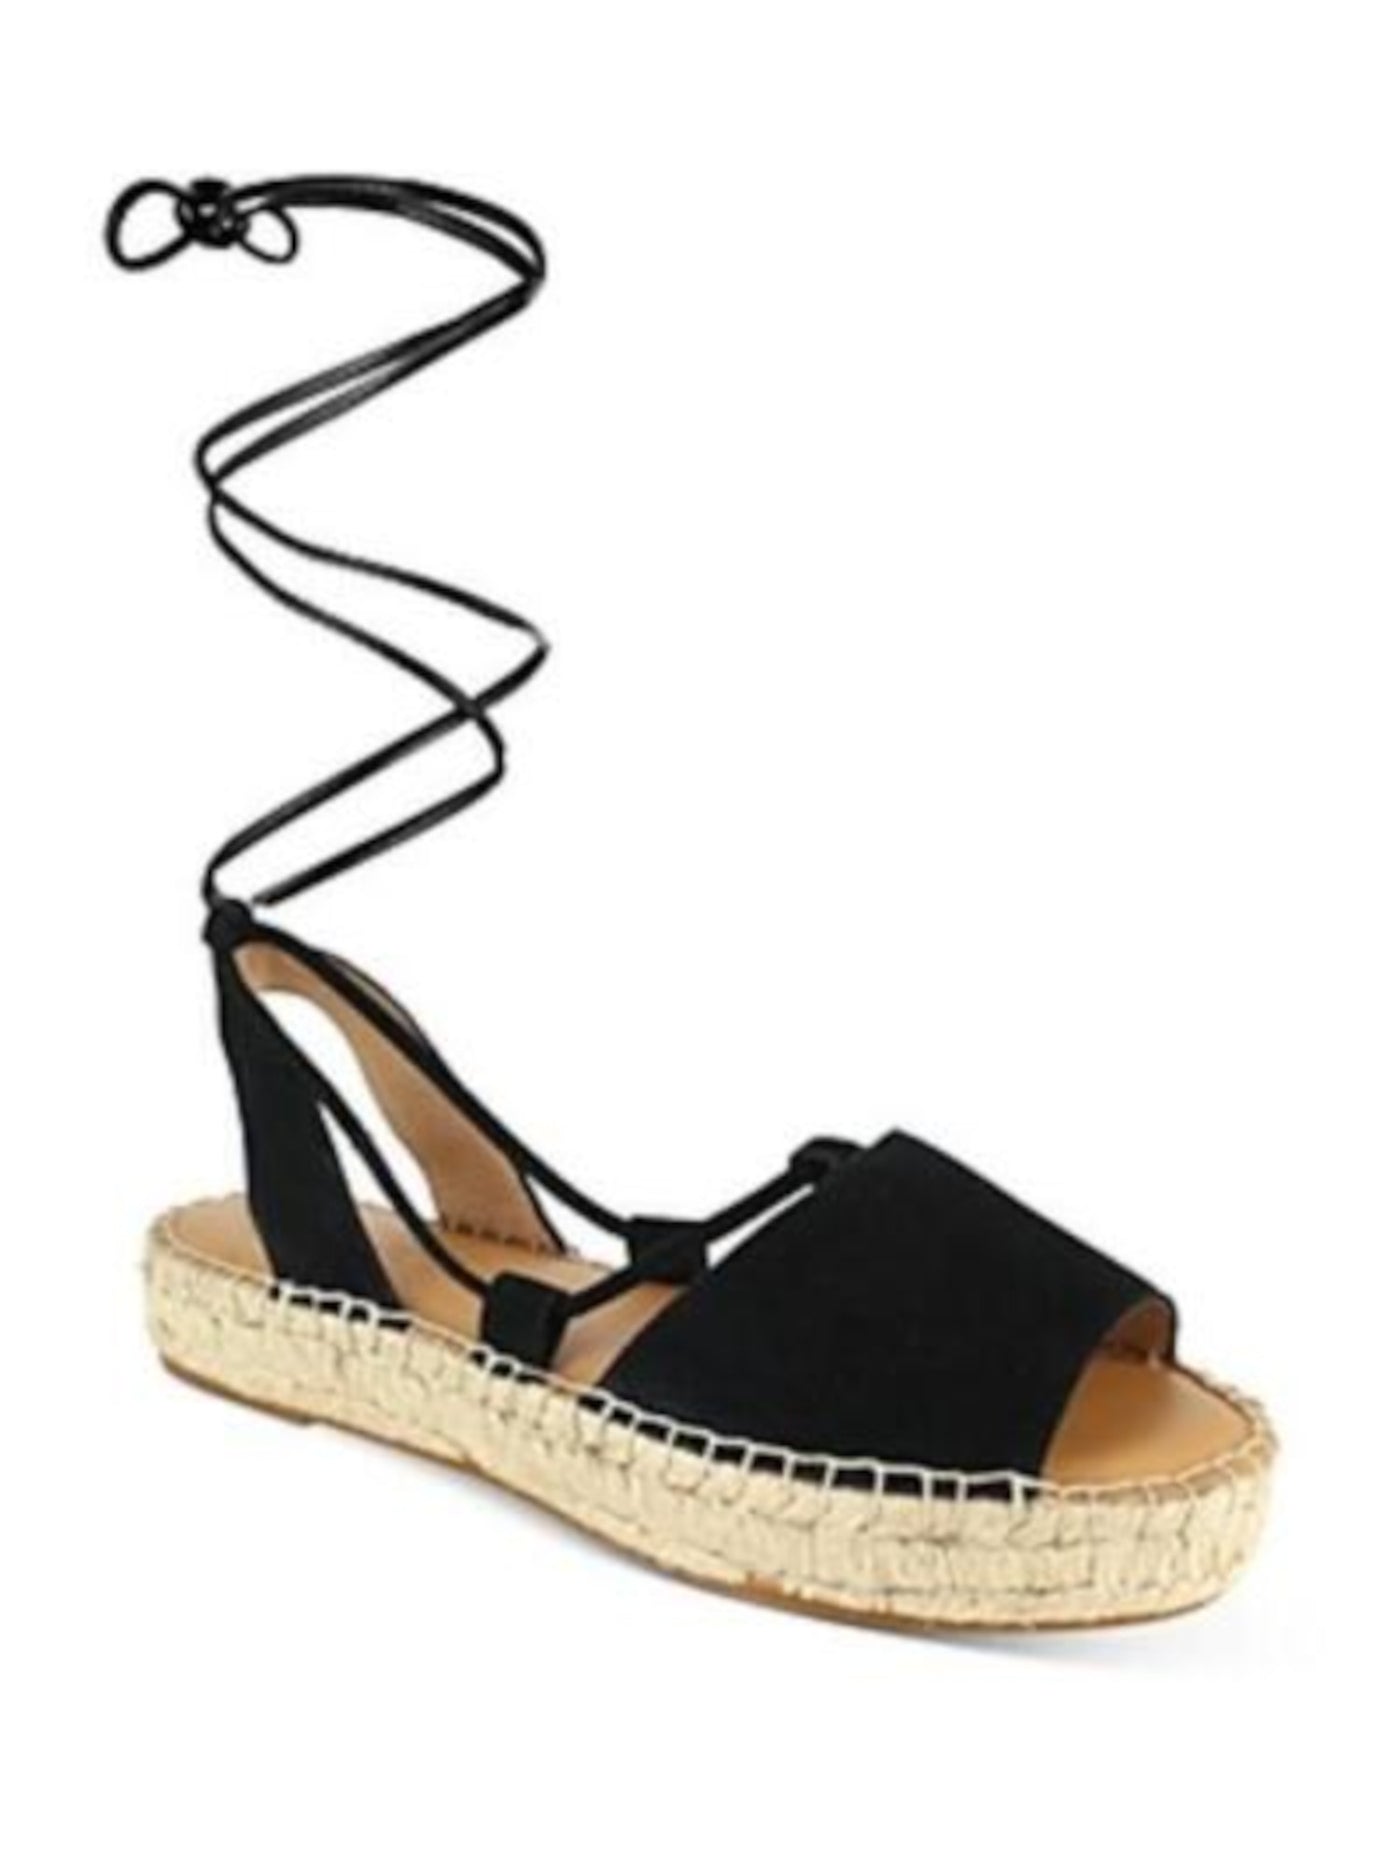 SPLENDID Womens Black Strappy Meredith Round Toe Platform Lace-Up Leather Espadrille Shoes 11 M